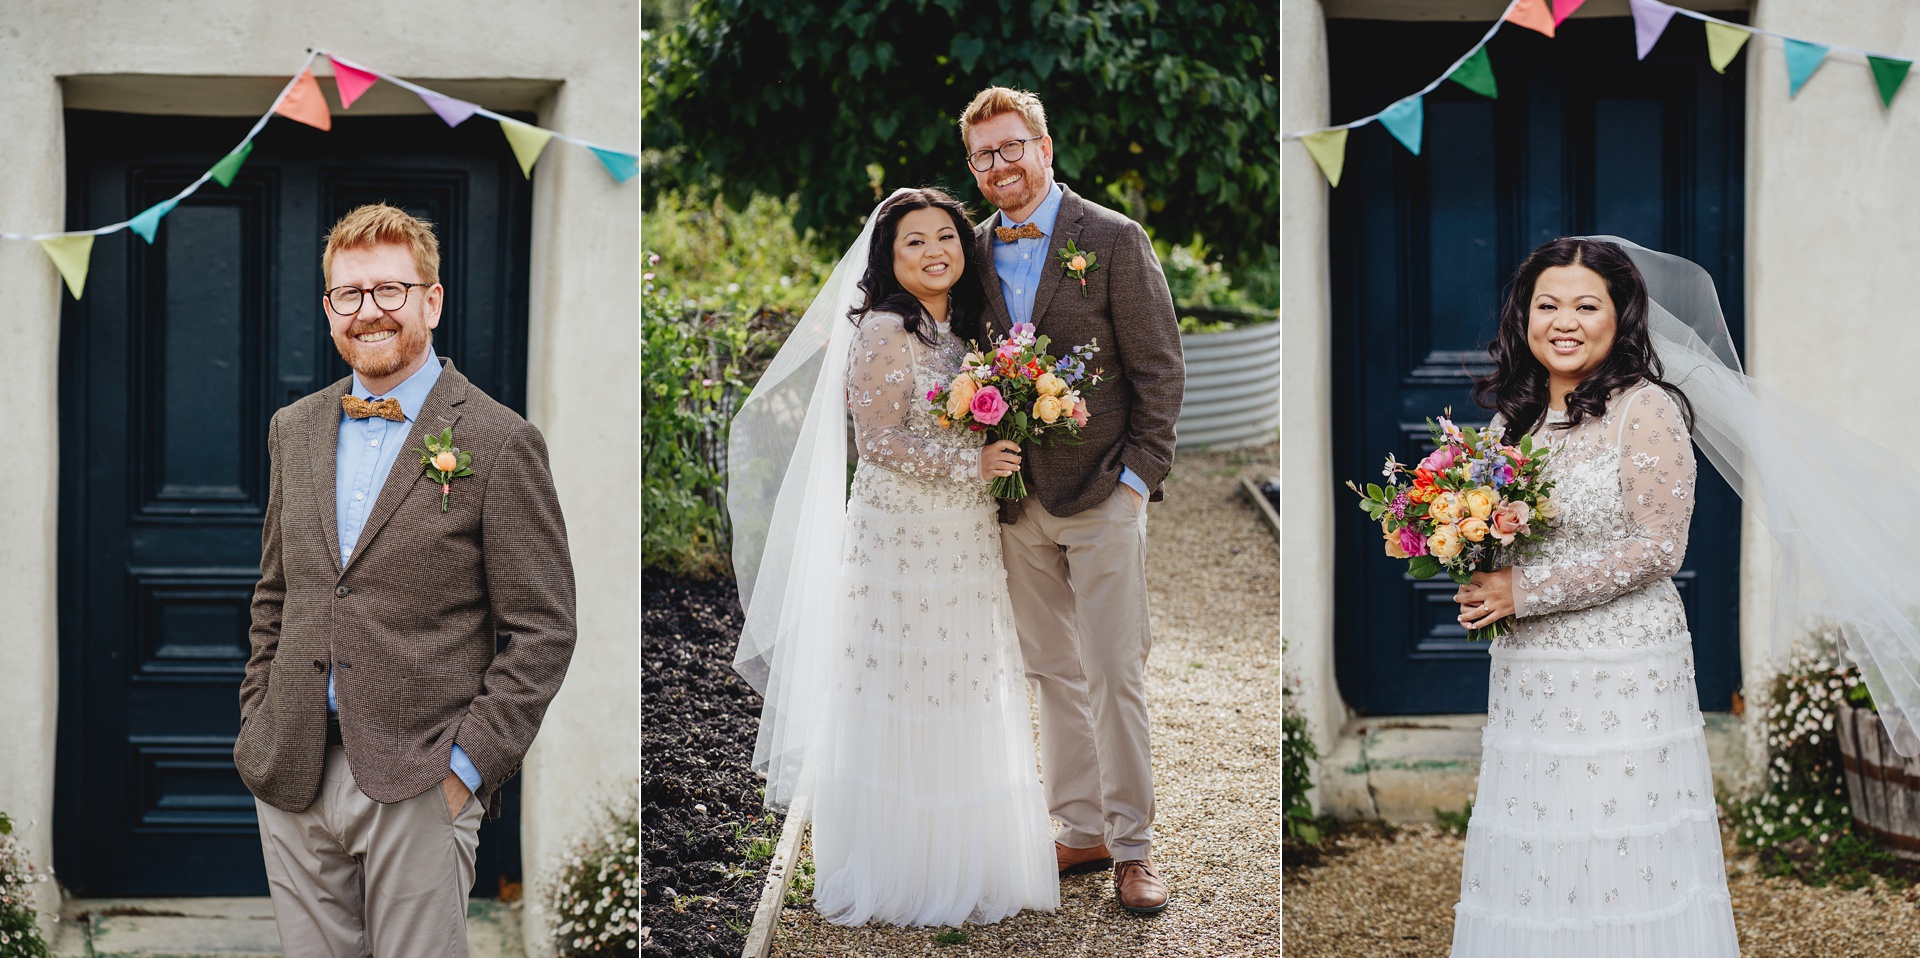 Portraits of a bride and groom in the kitchen garden at river cottage, for their autumn outdoor wedding